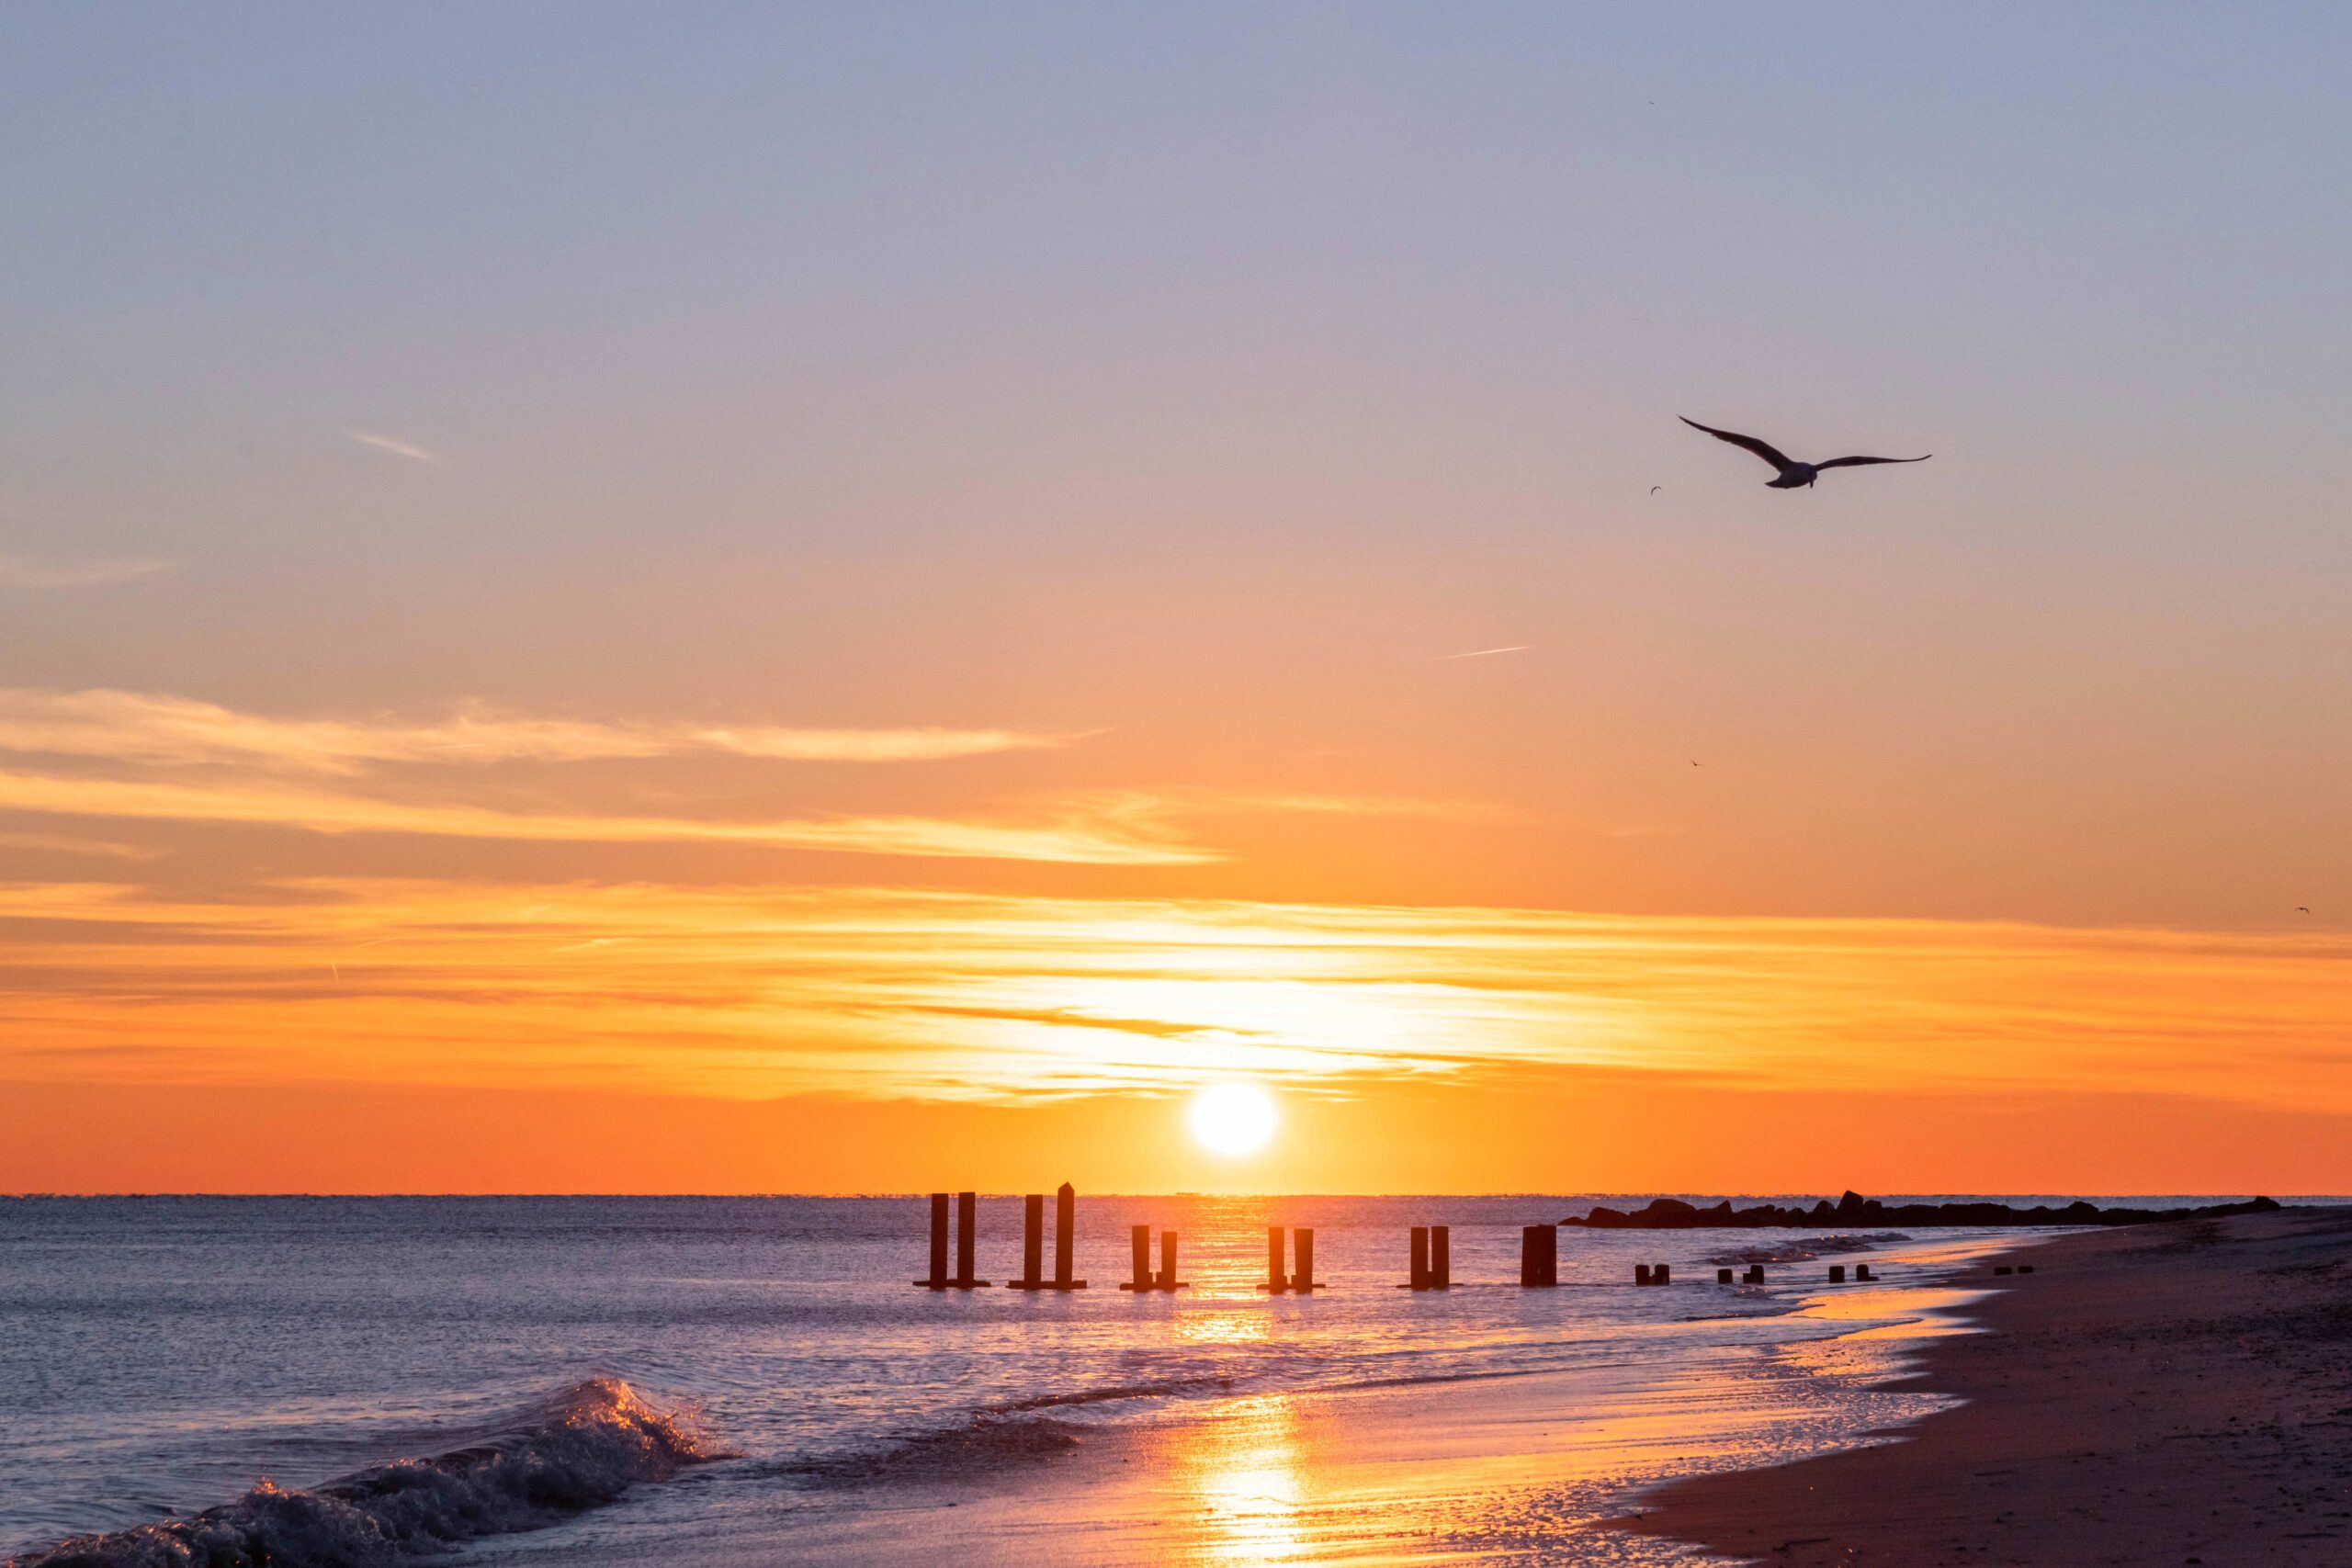 A bird flying in a clear sky with thin wispy clouds at the horizon at sunset, with a wave crashing and the jetty sticking out of the ocean at the beach